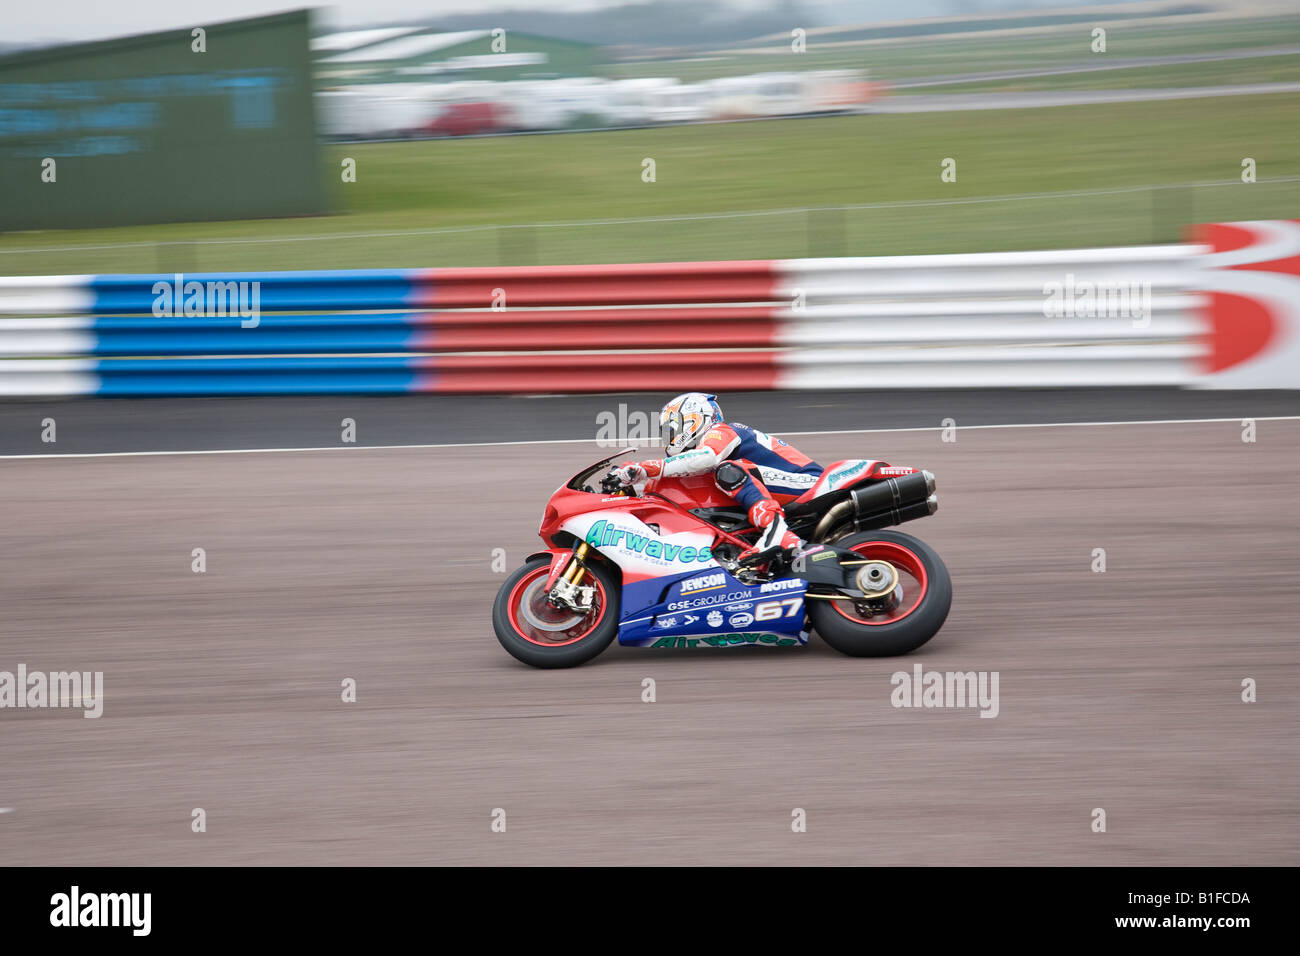 Shane (Shakey) Byrne riding an Airwaves Ducati on the pit straight at Thruxton during practice for the BSB Championship Stock Photo